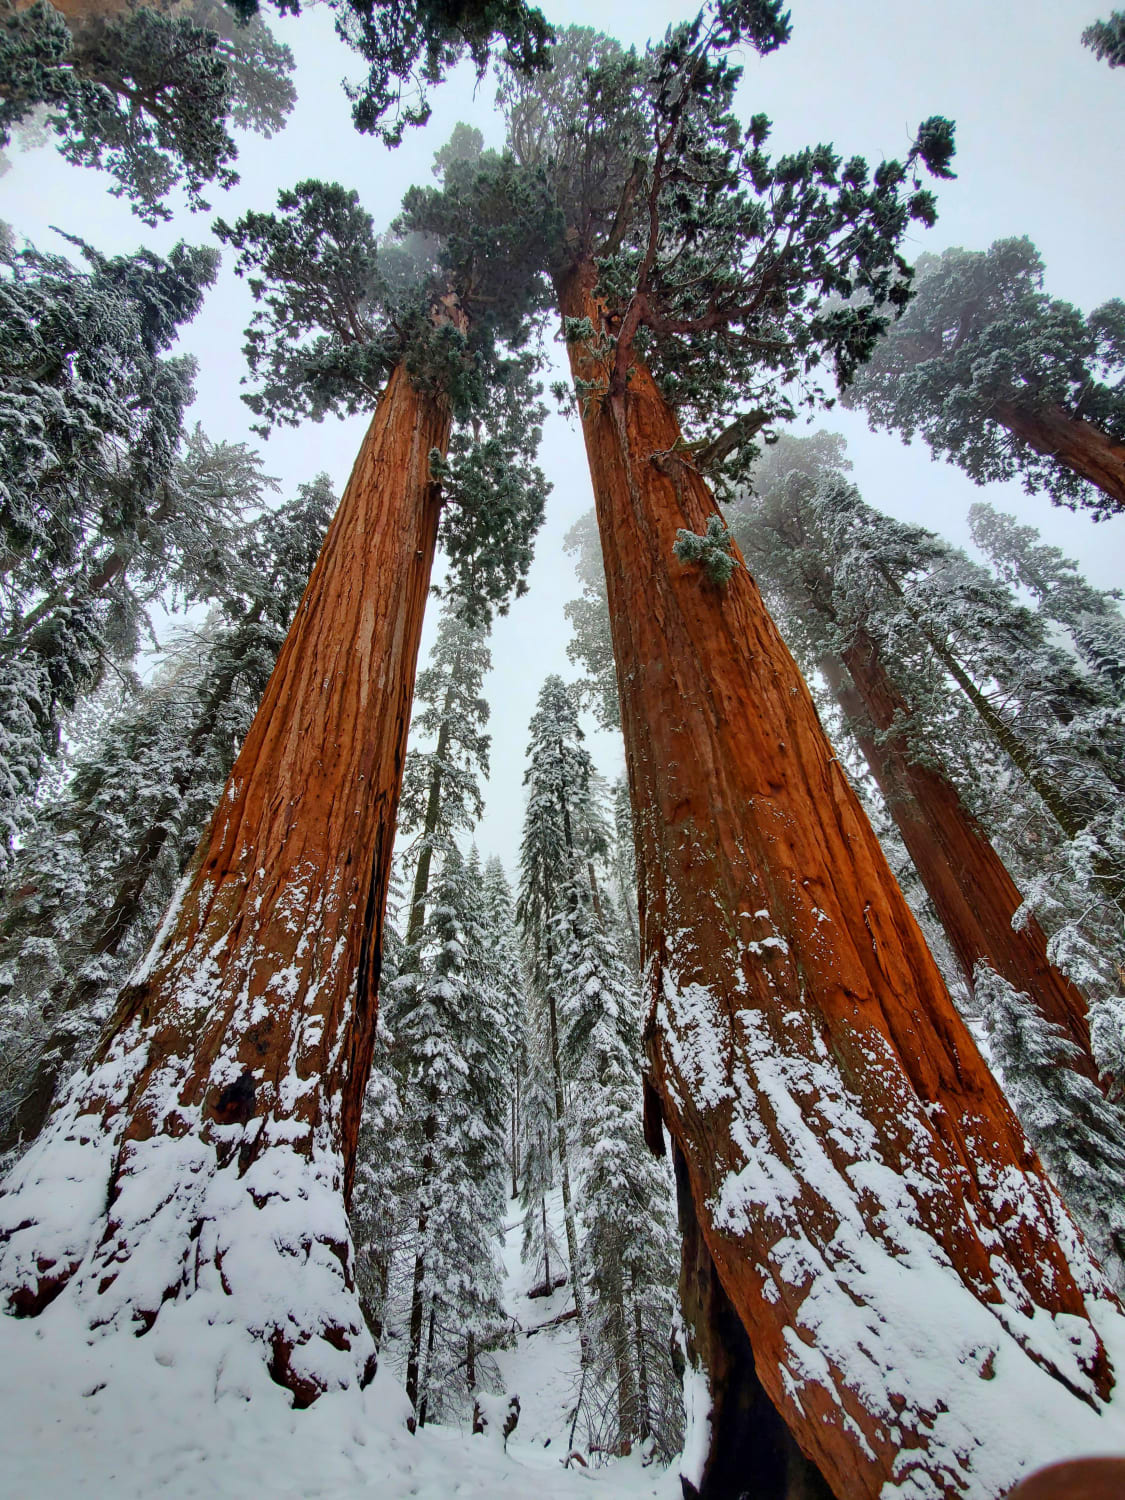 Sequoia National Park looks so much better with snow imo